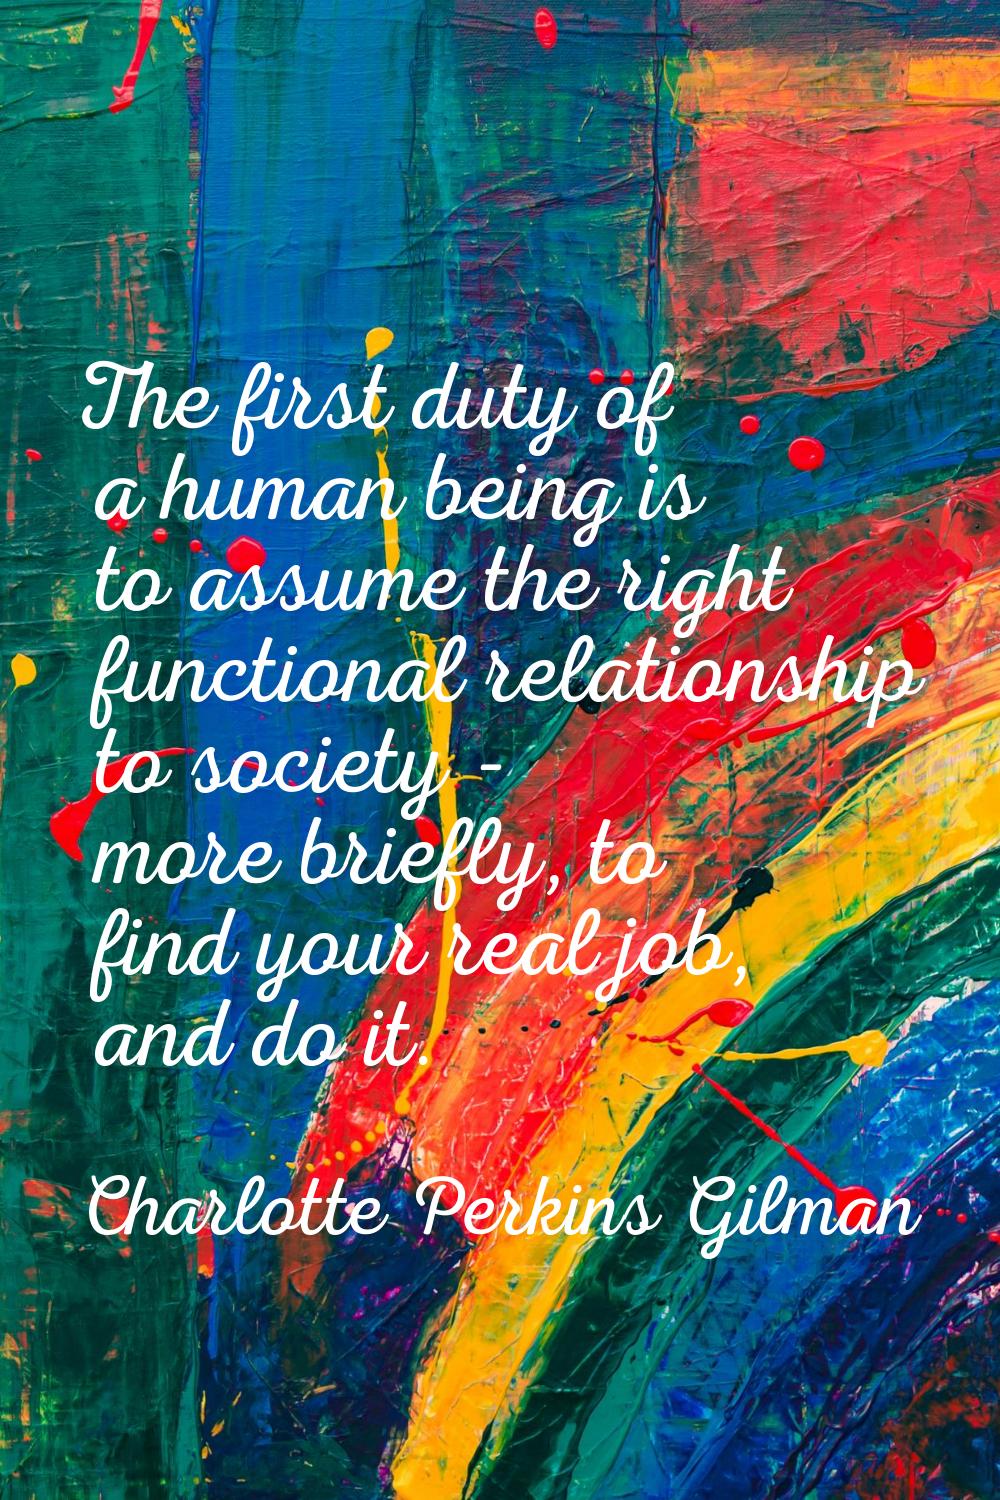 The first duty of a human being is to assume the right functional relationship to society - more br